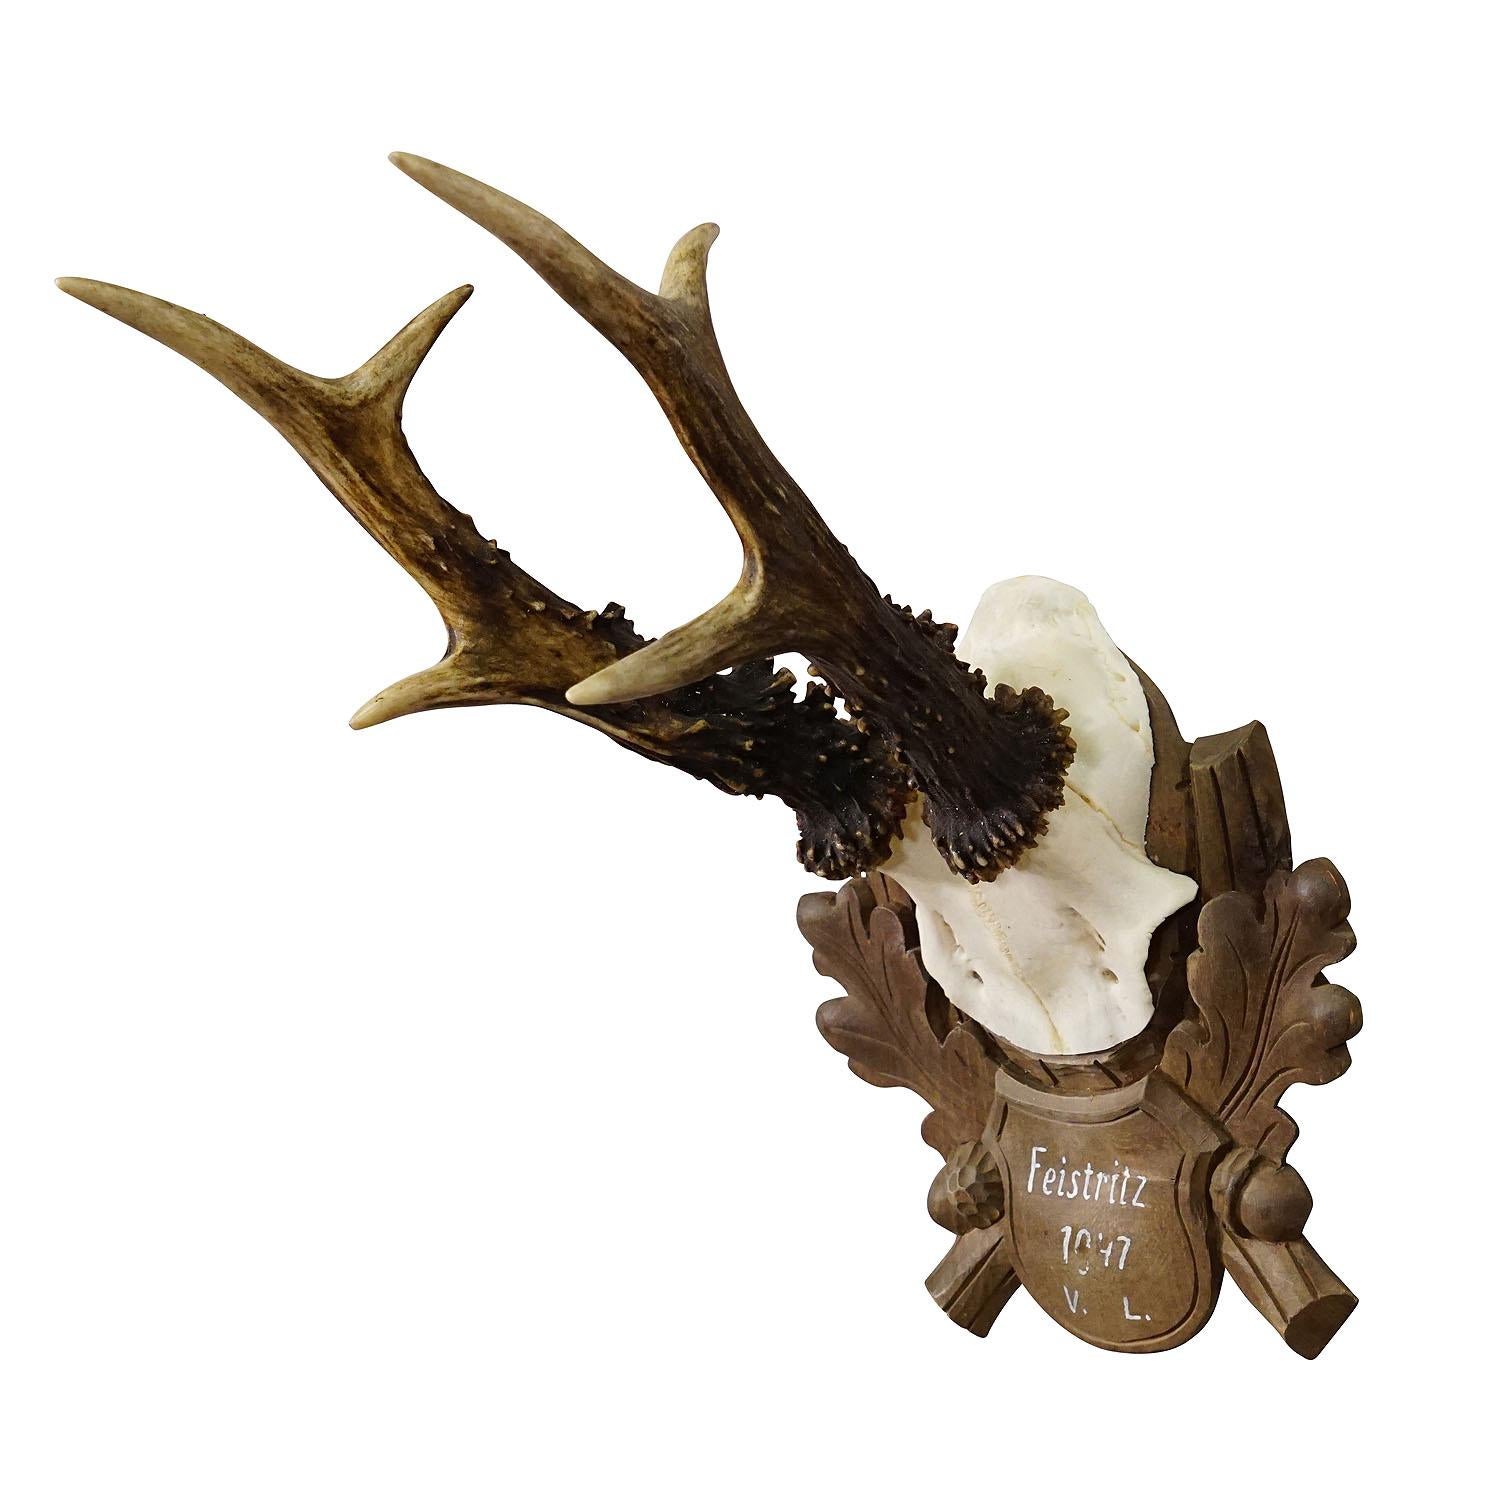 Black Forest Vintage Deer Trophy on Carved Plaque 1947

A large vintage deer (Capreolus capreolus) trophy on a wooden carved plaque. The plaque features a handpainted inscription. The trophy was shot in 1947. Good condition.

Trophies are mementos